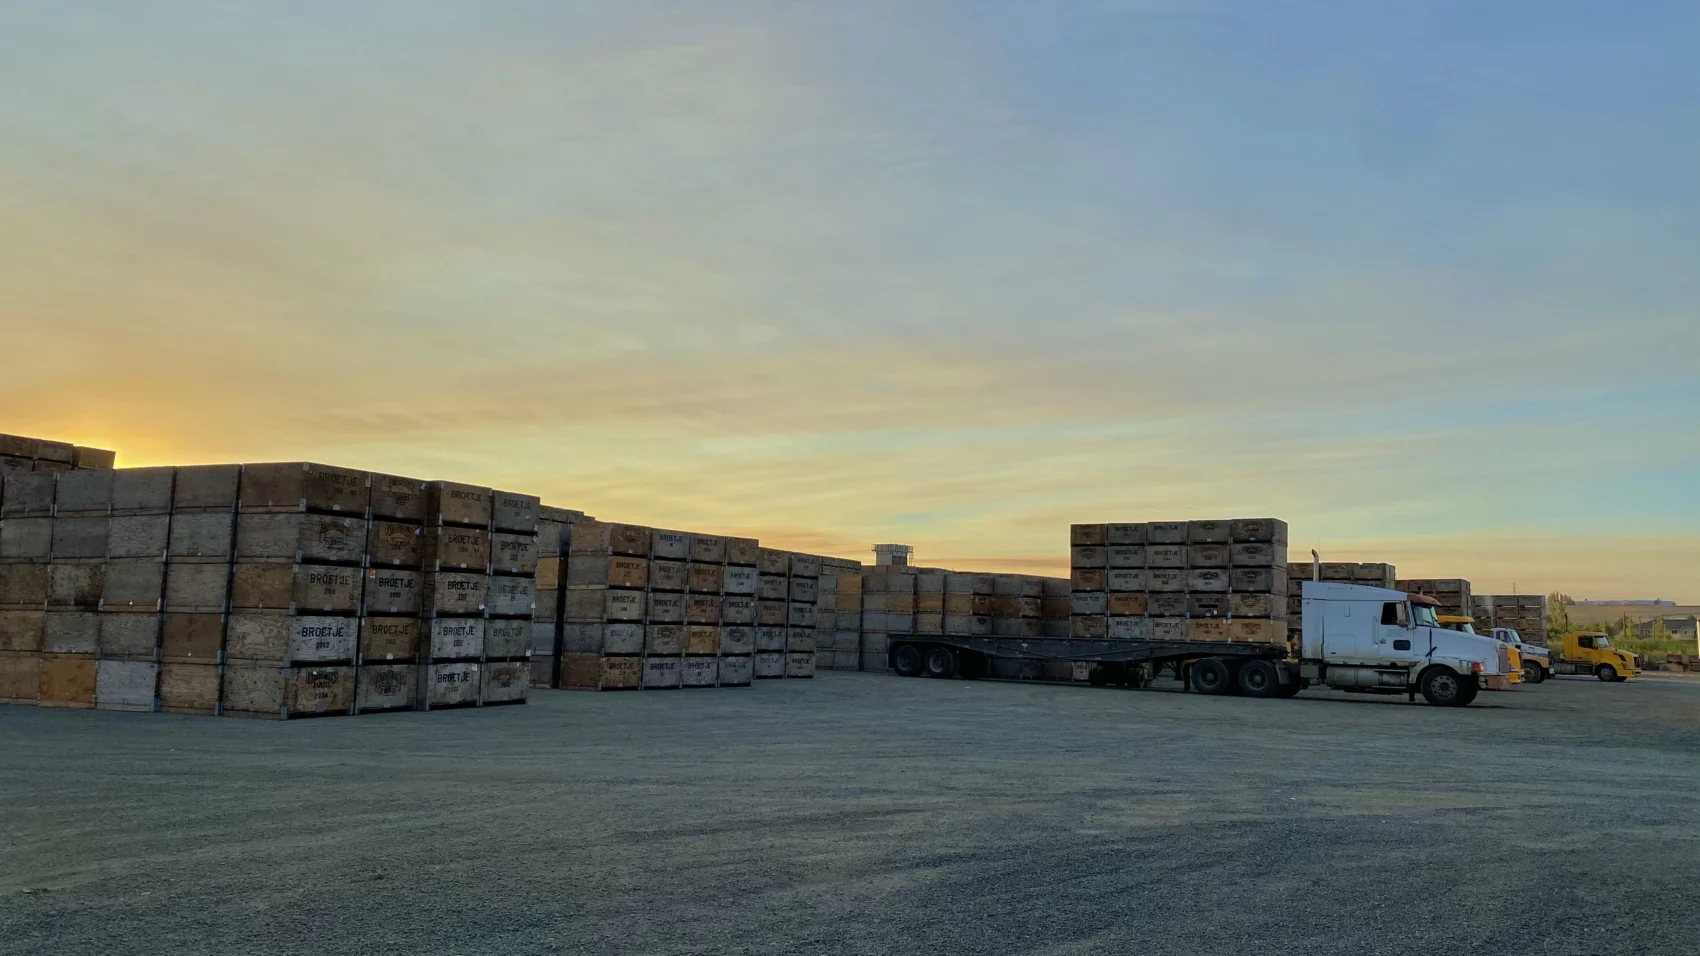 Apple bins stacked and a truck at dusk.